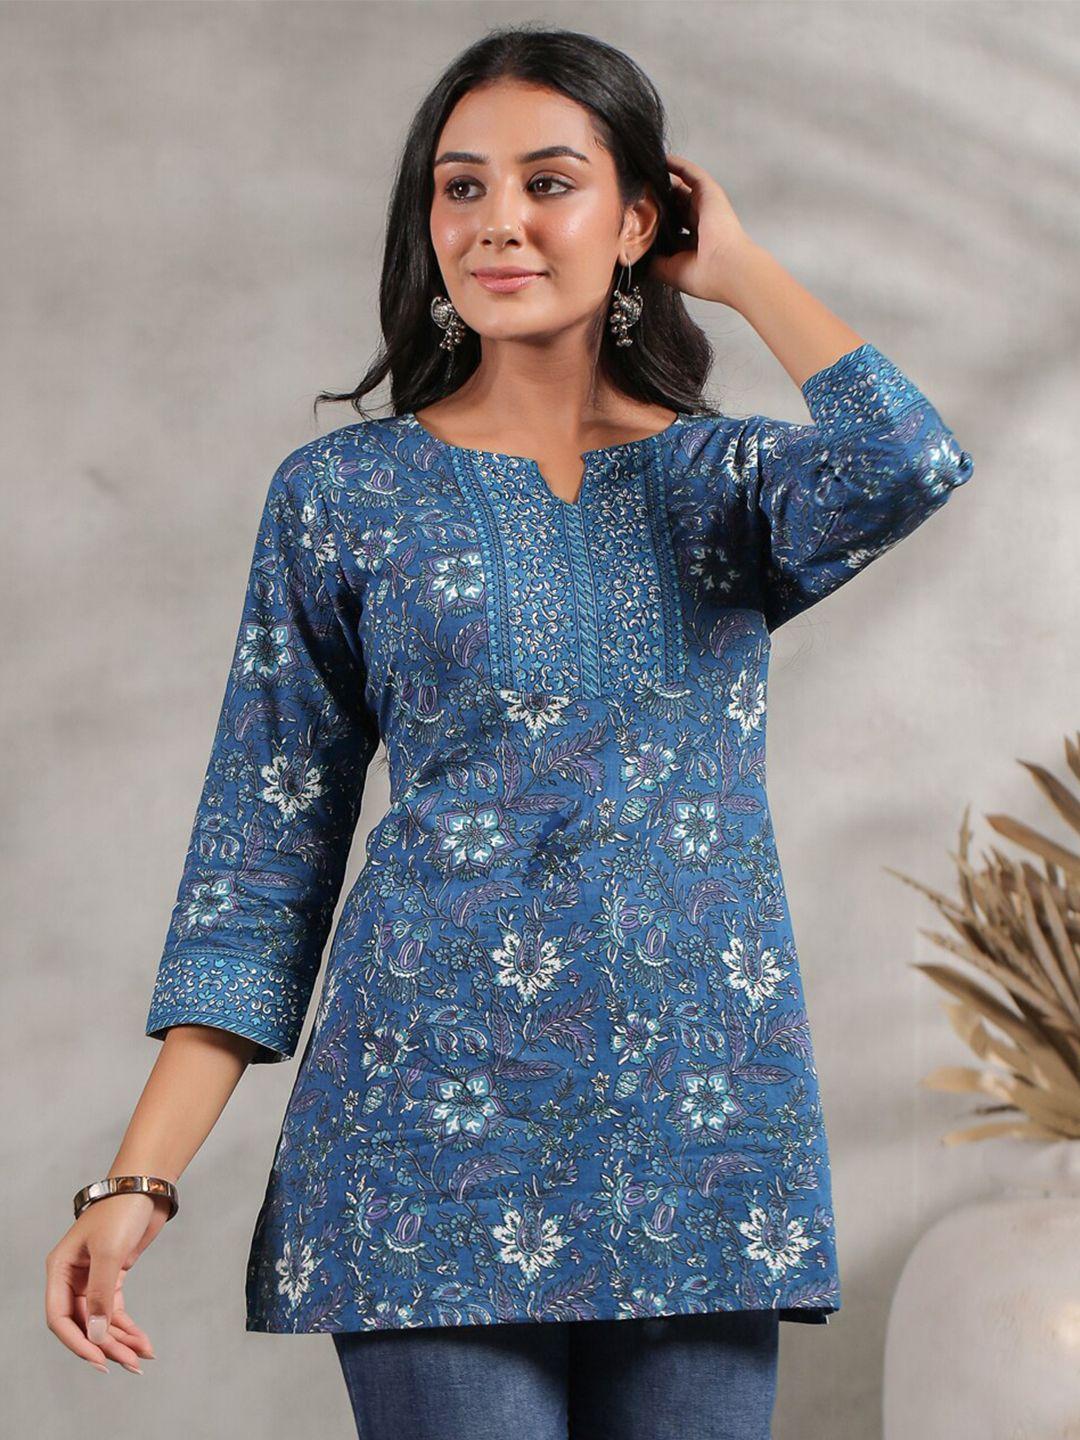 anubhutee turquoise blue floral printed pure cotton kurti